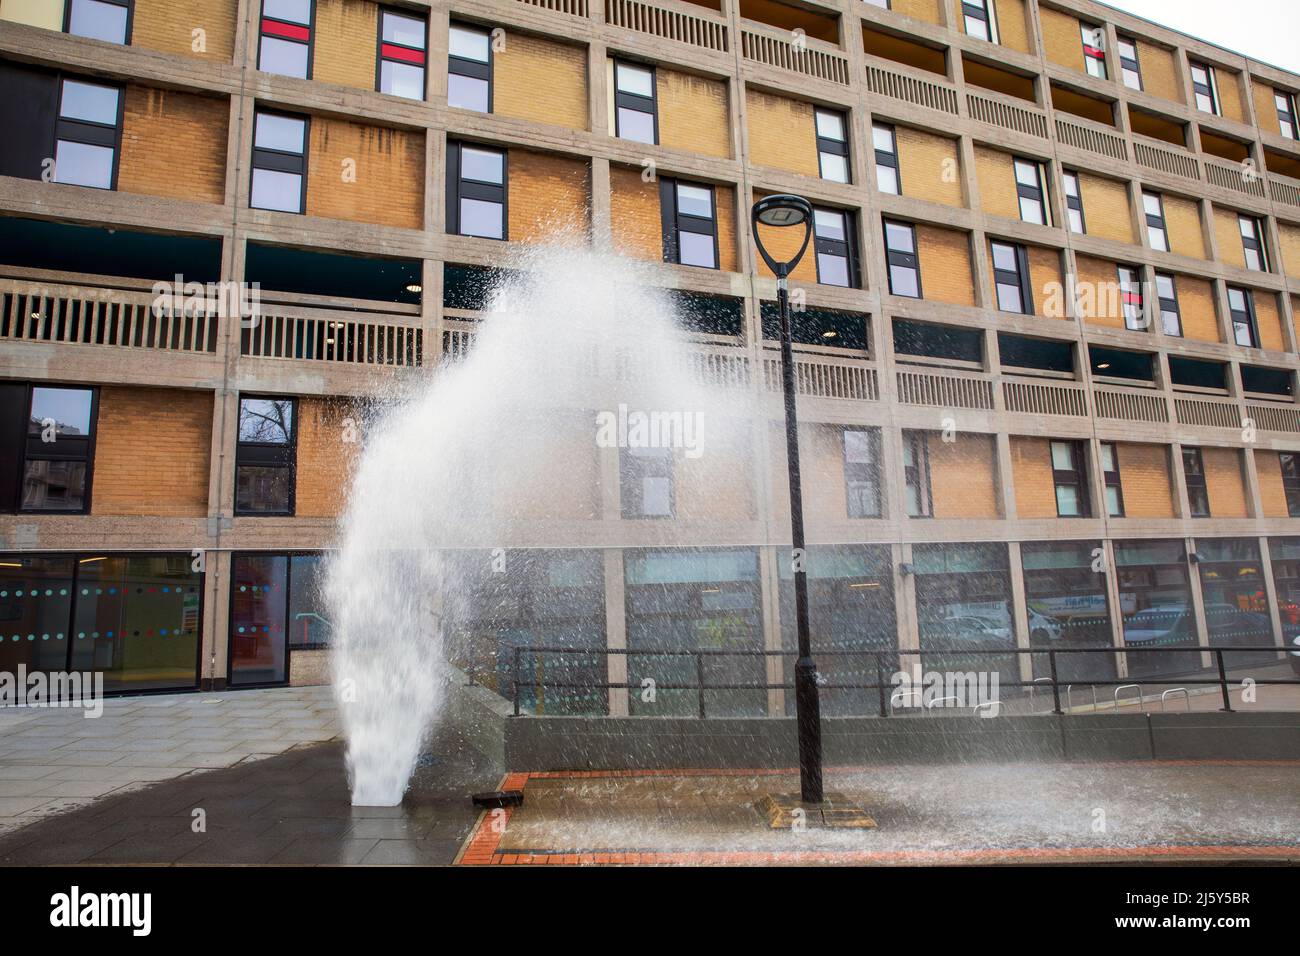 A burst water pipe. Hyde Park Flats, some of which are still under renovation, Sheffield. Stock Photo